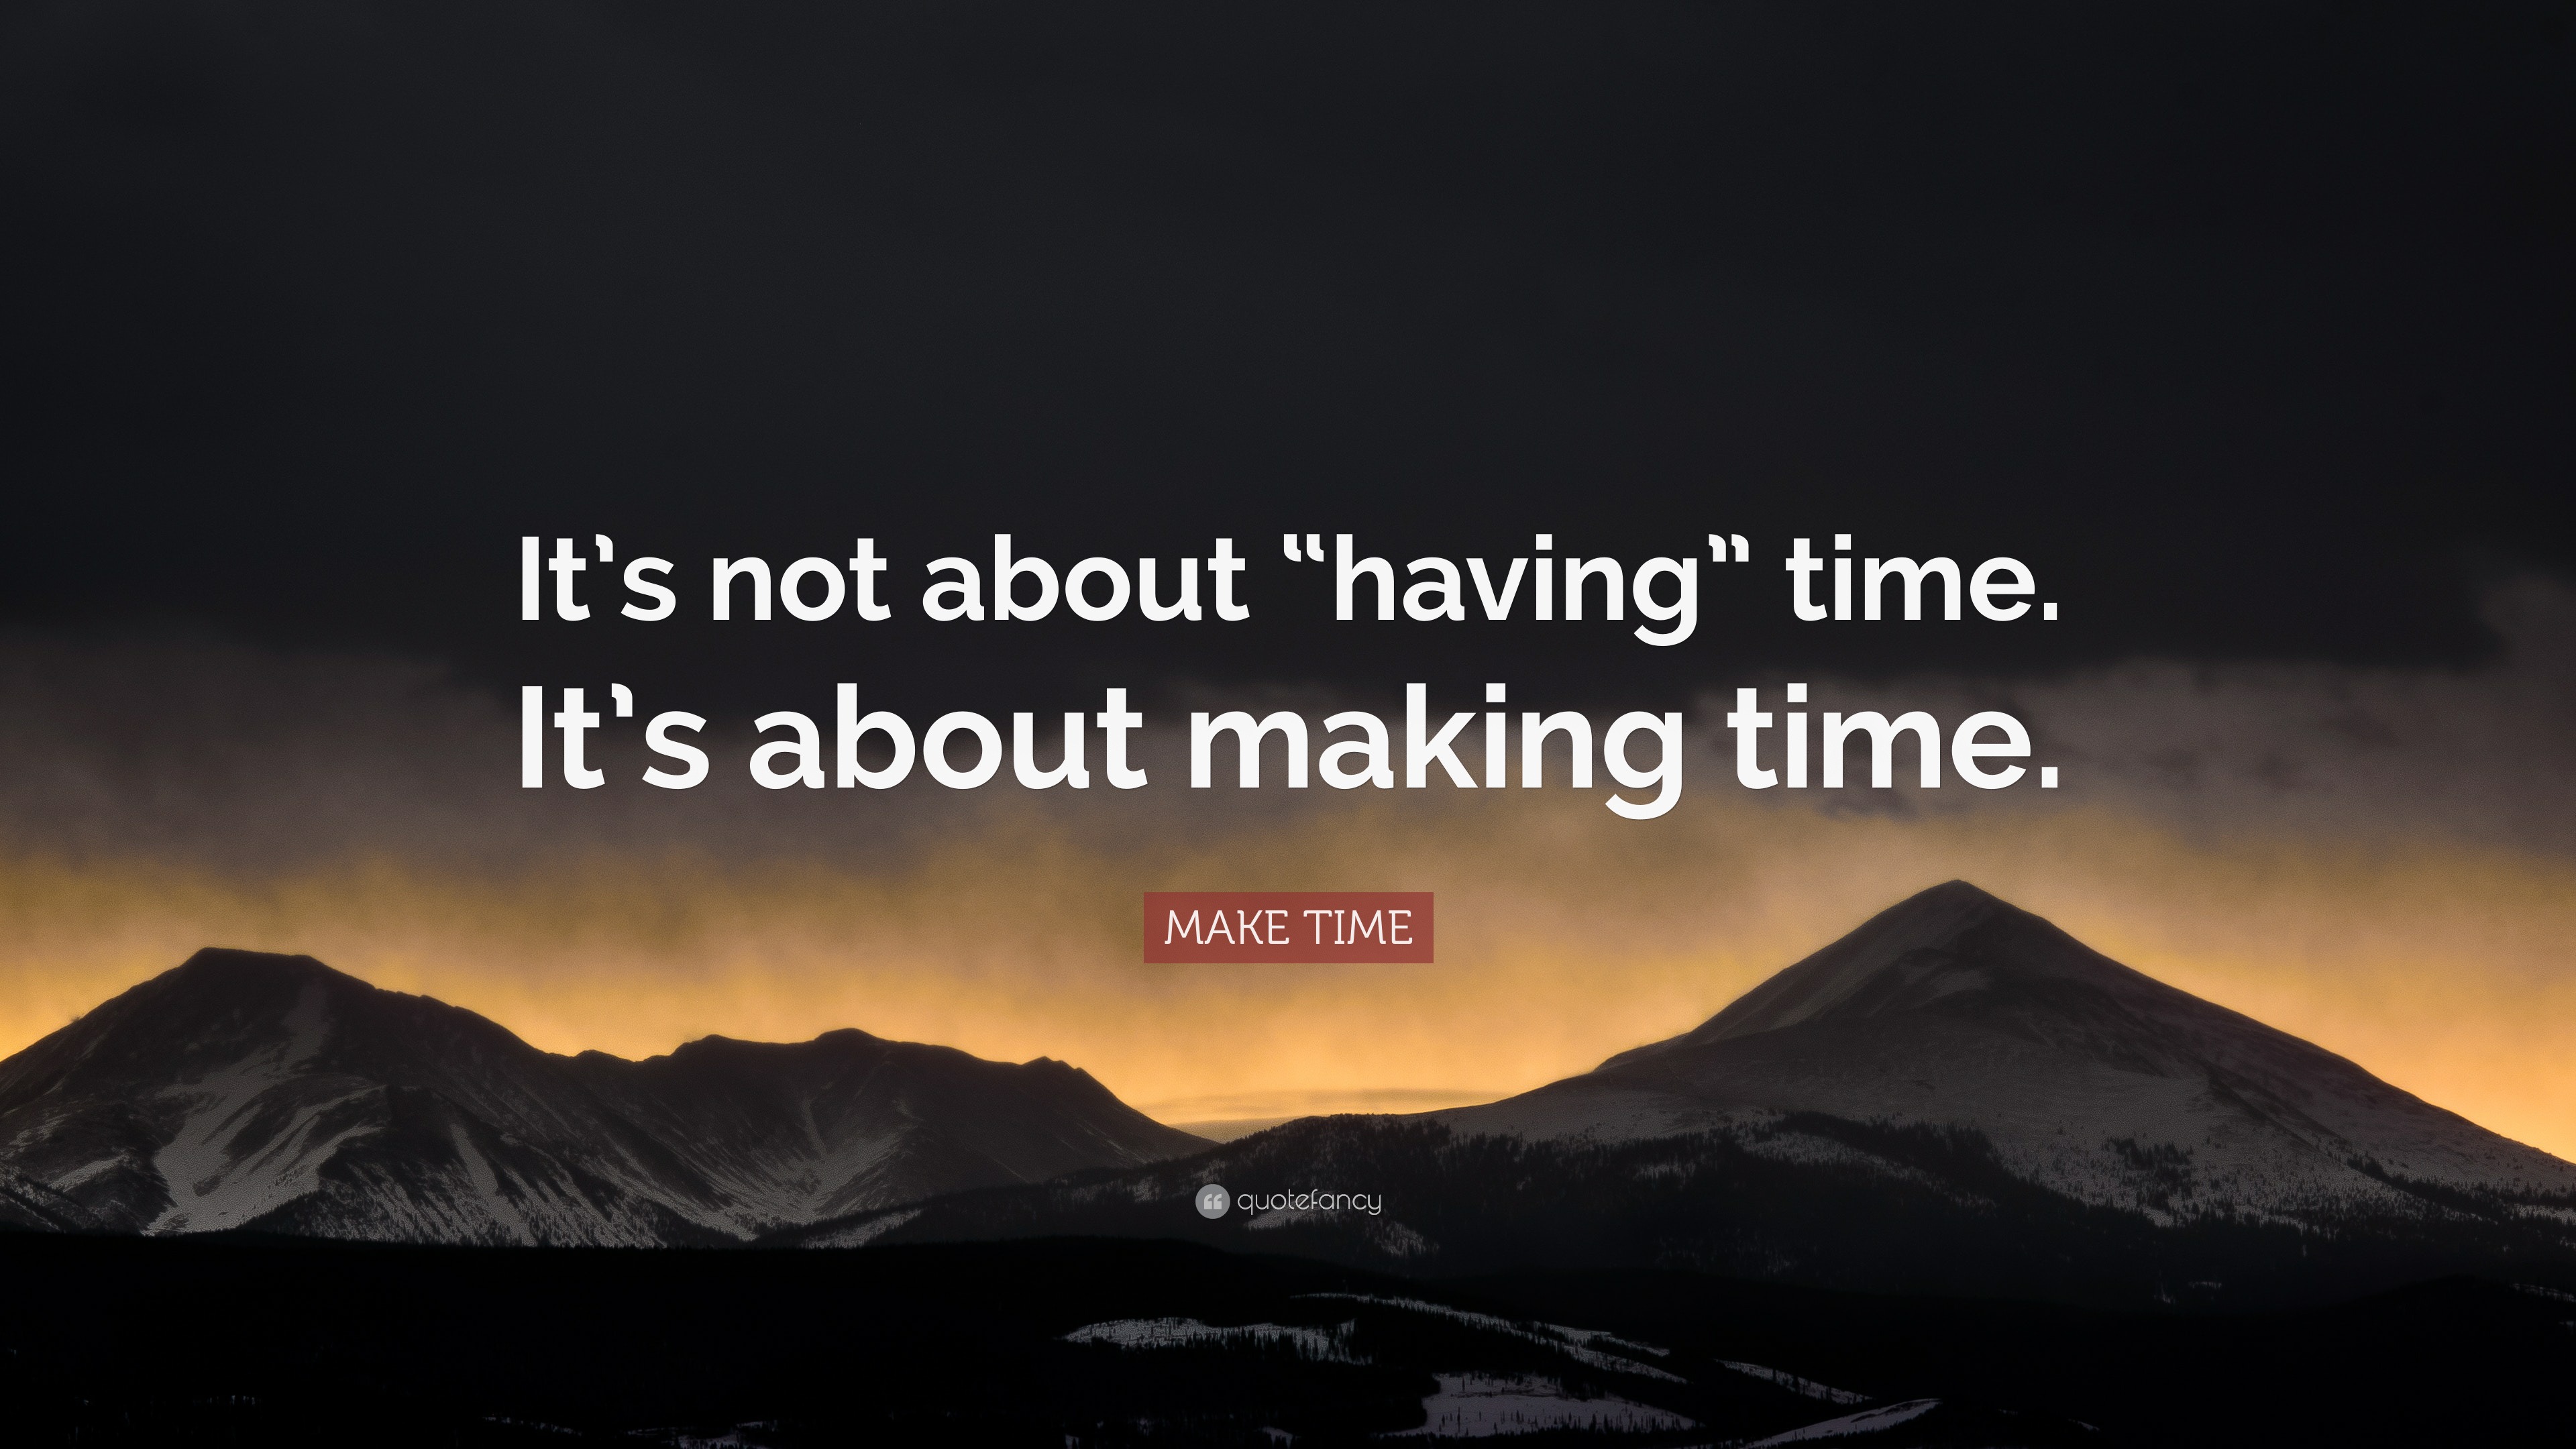 quotes on timing